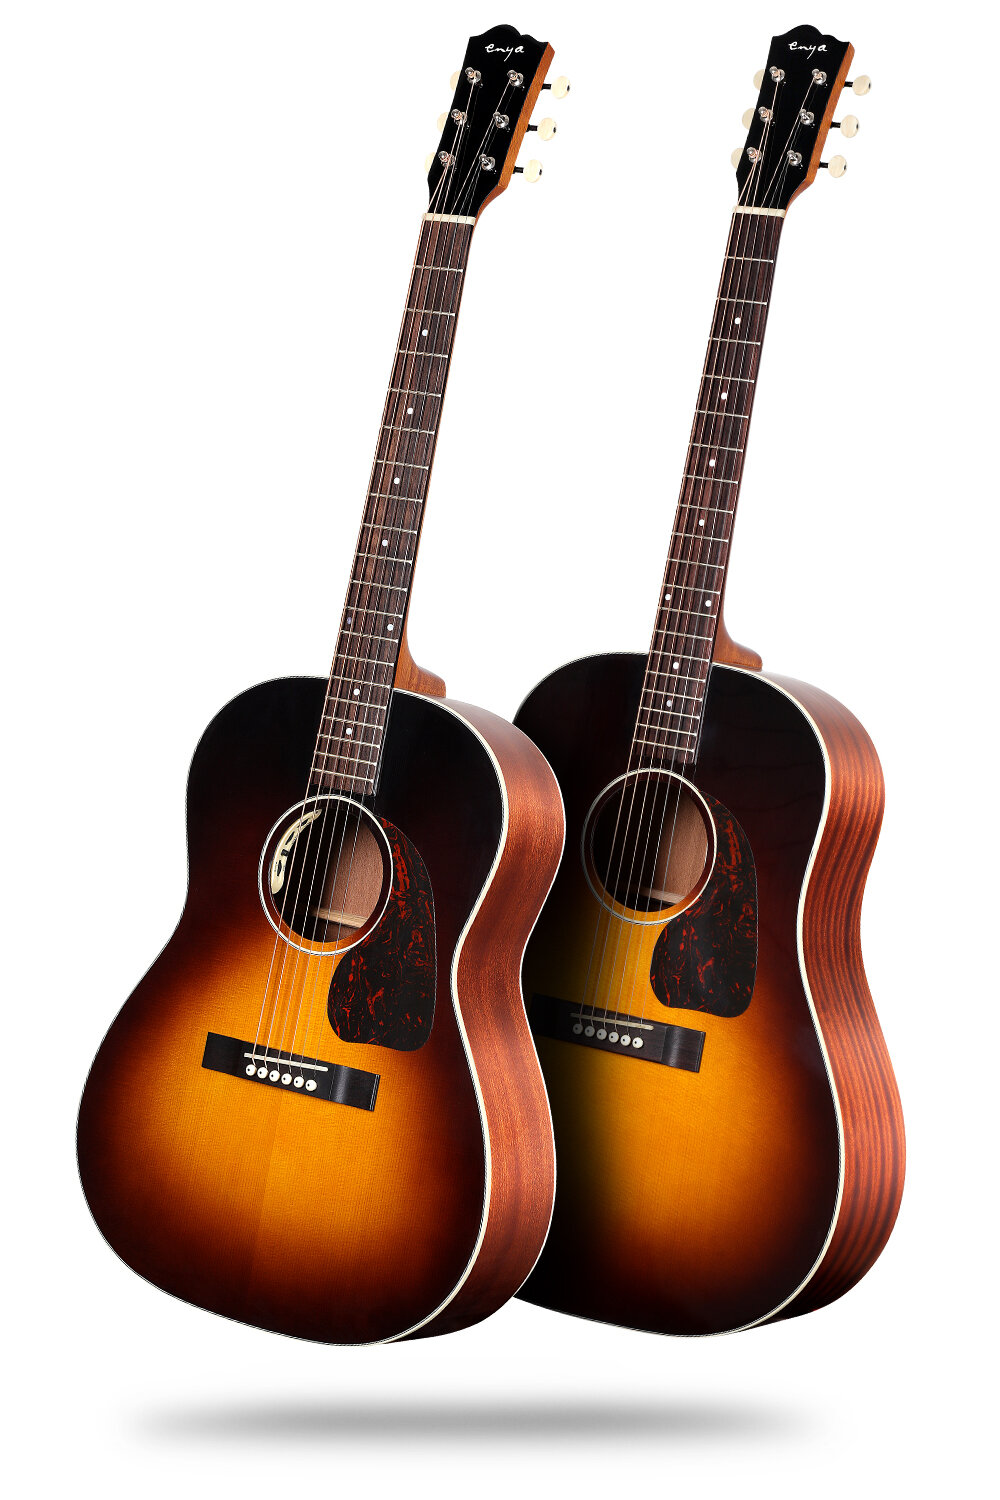 Two body shape for option! - T05 tributes to the Gibson Jumbo model. 41-inch J model (tribute to the original Gibson J45), and 38 inch B model (restore the pre-war style Gibson classic body, travel version) Reproduce the classic sound of the acoustic guitar golden age！